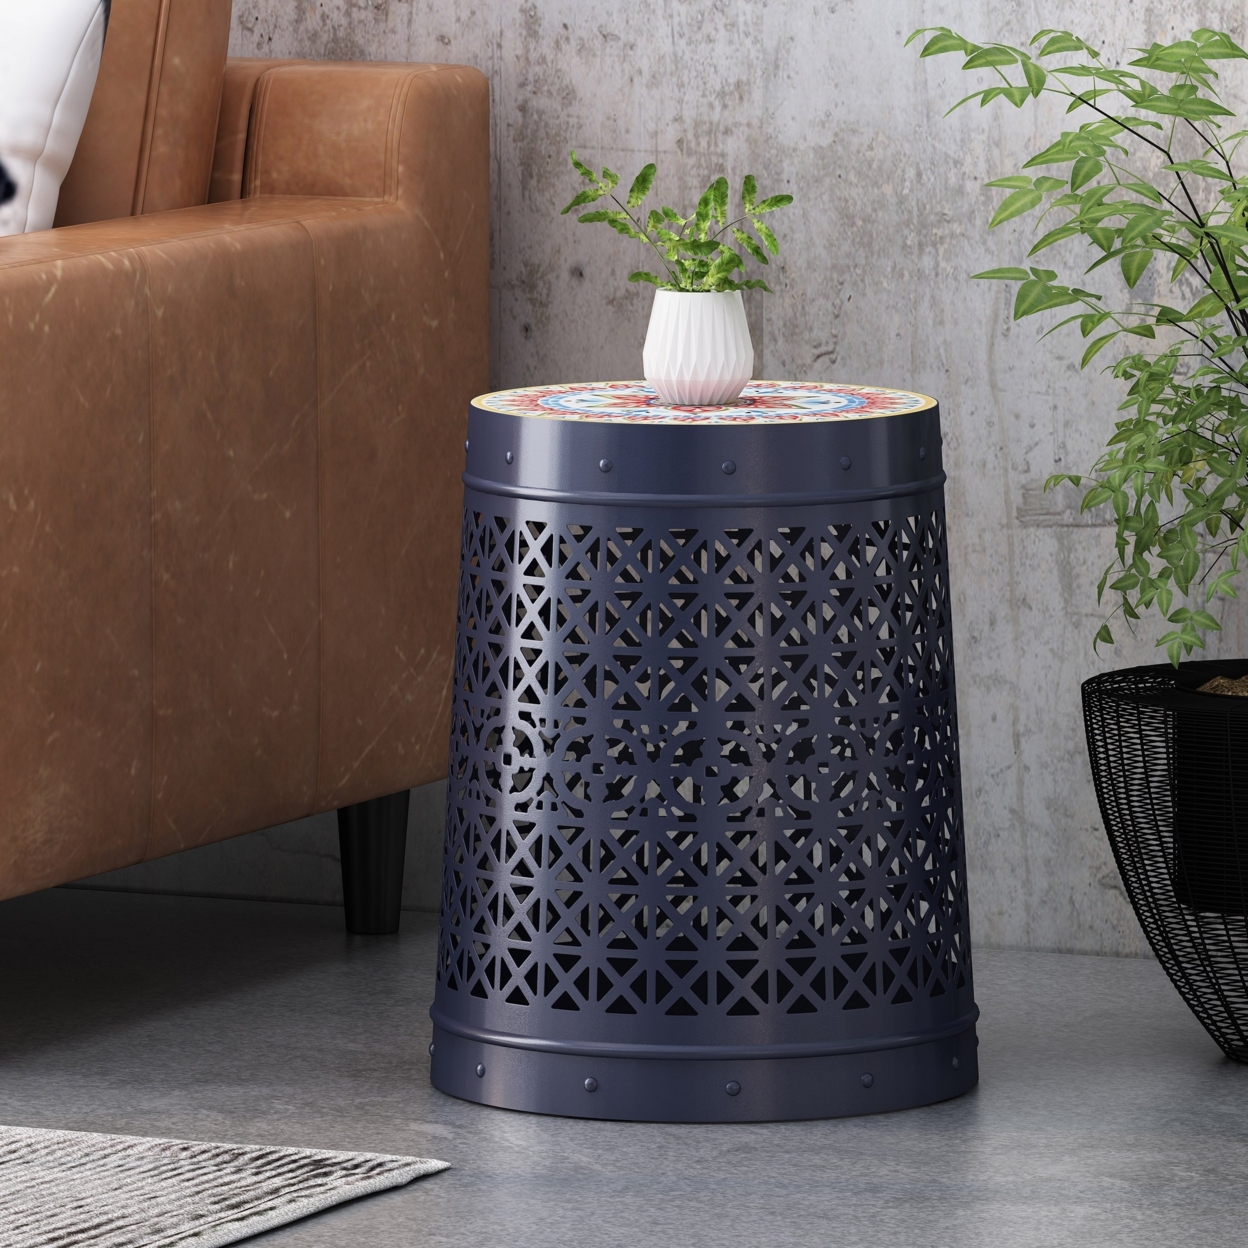 Folajimi Indoor Lace Cut Side Table With Tile Top - Dark Blue